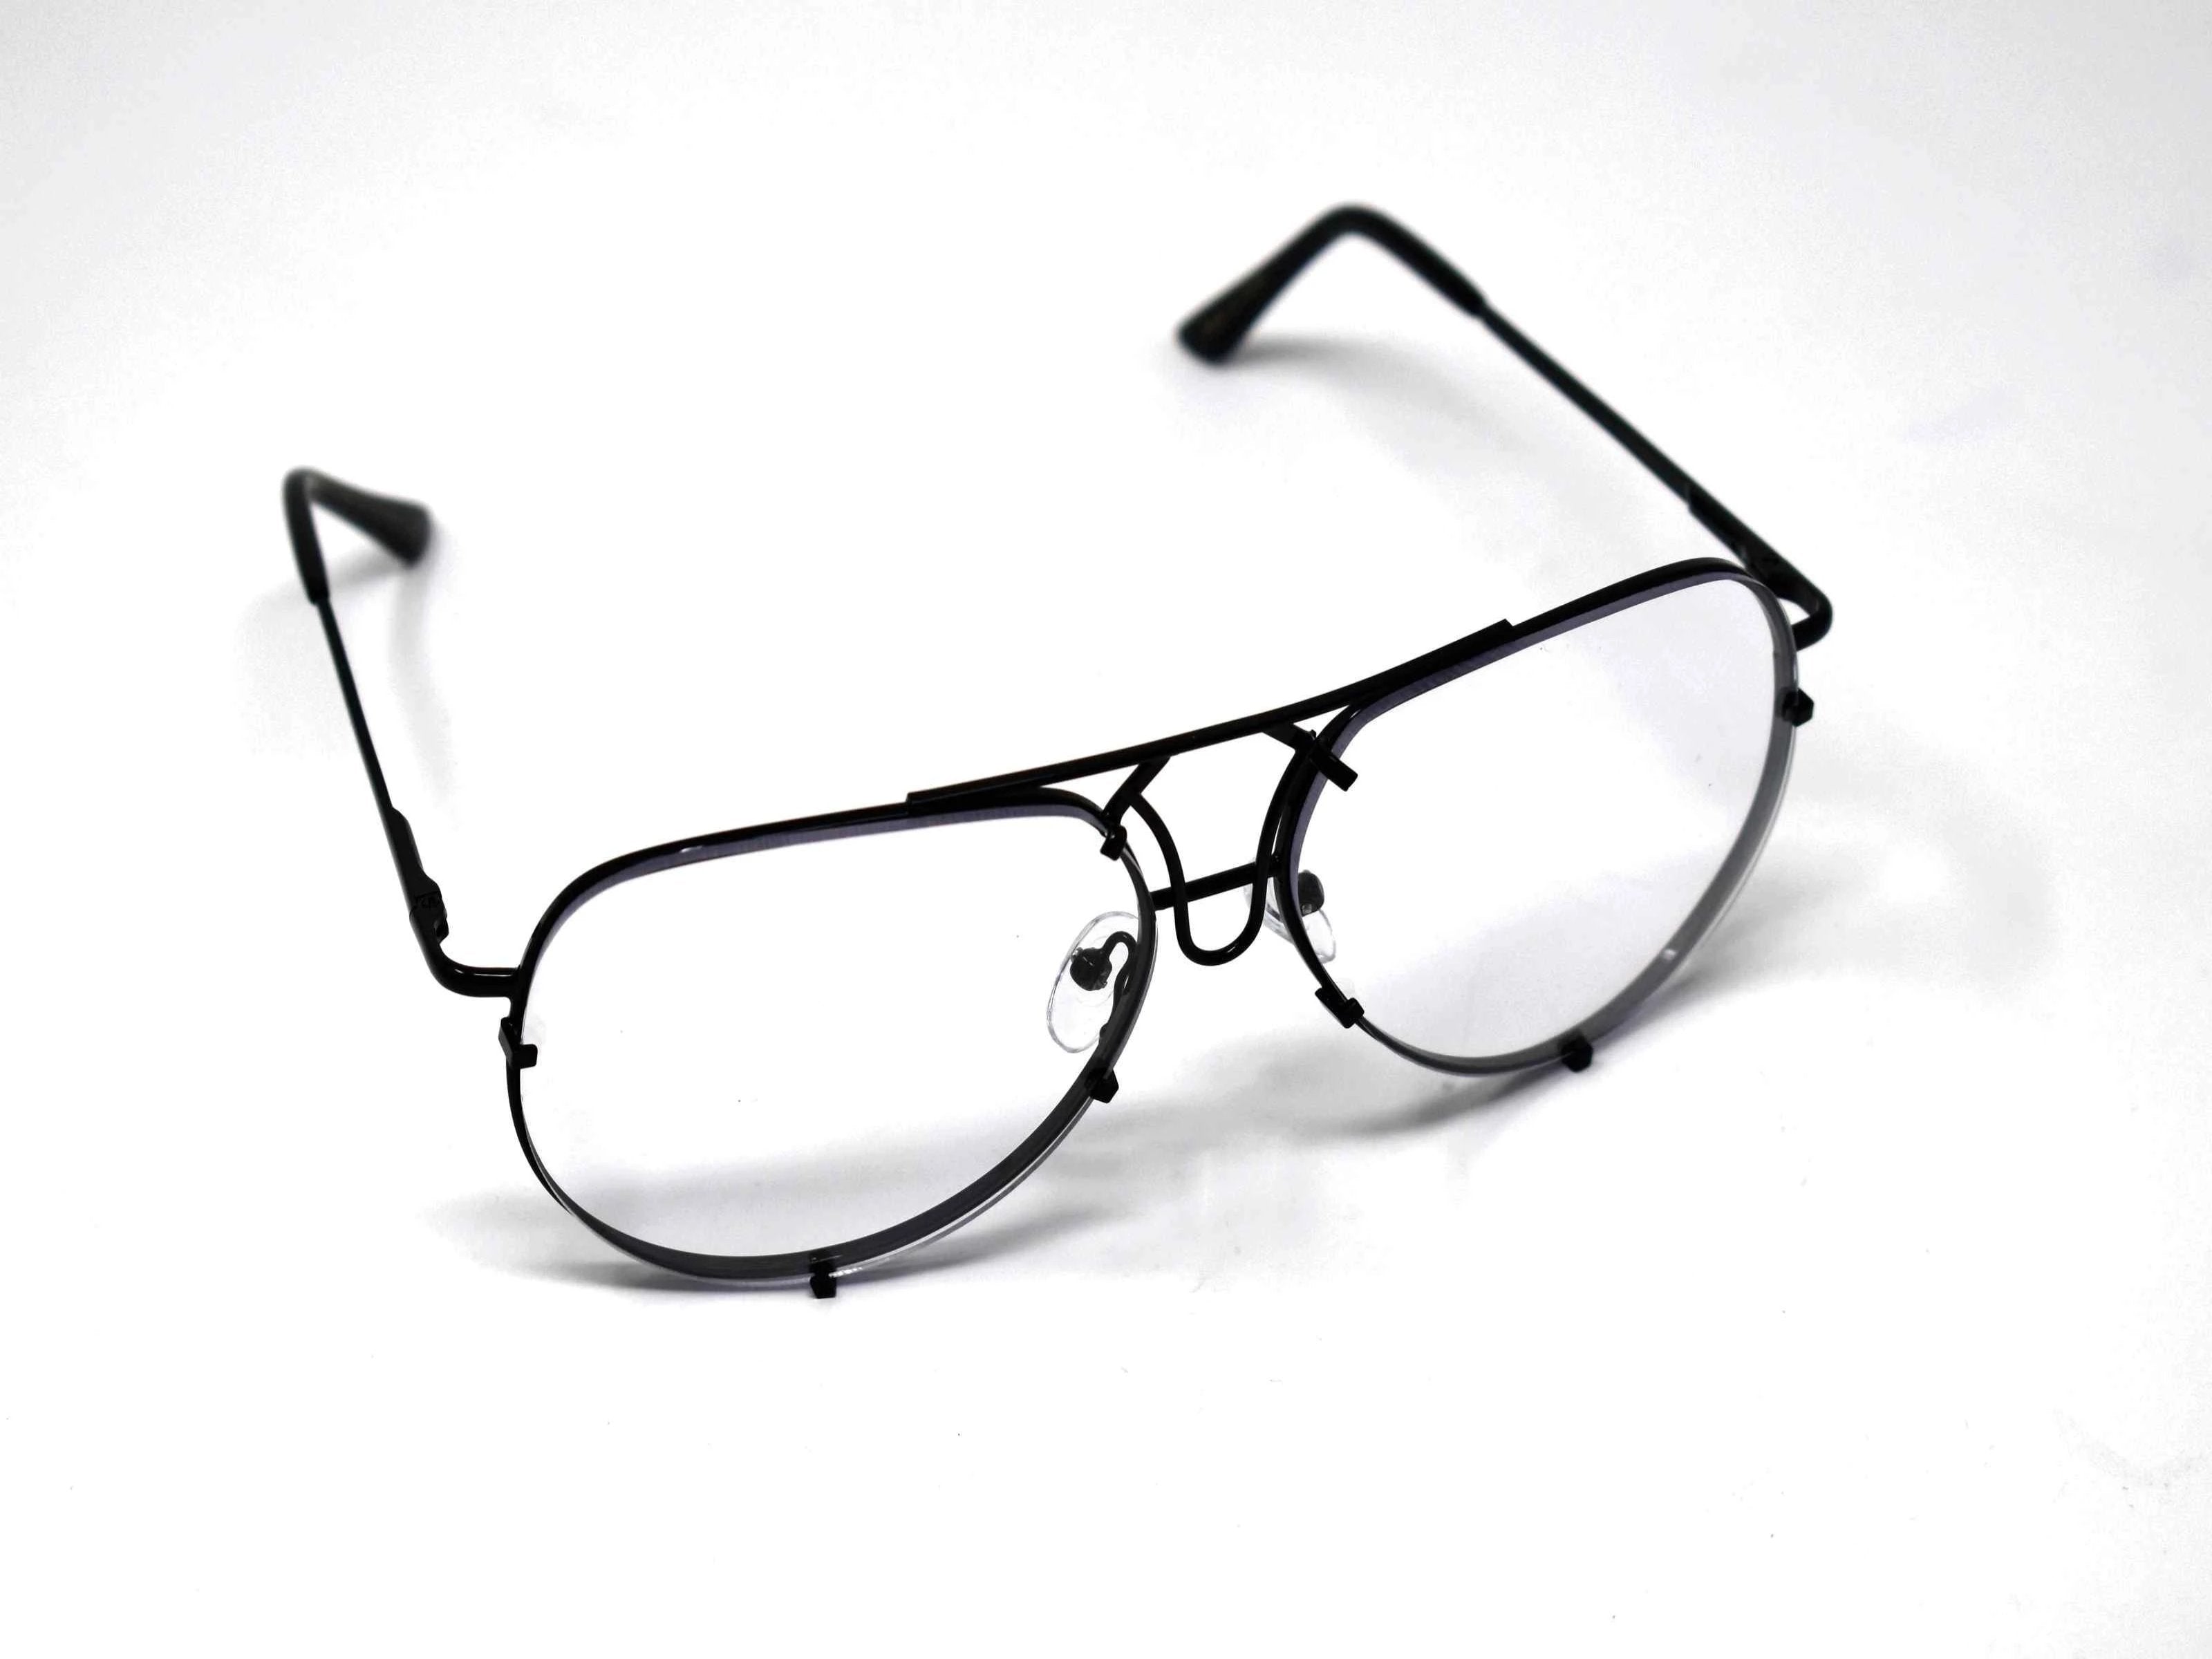 Make sure you indulge in our brilliant Viburnum Black aviator style glasses with a clear lens.